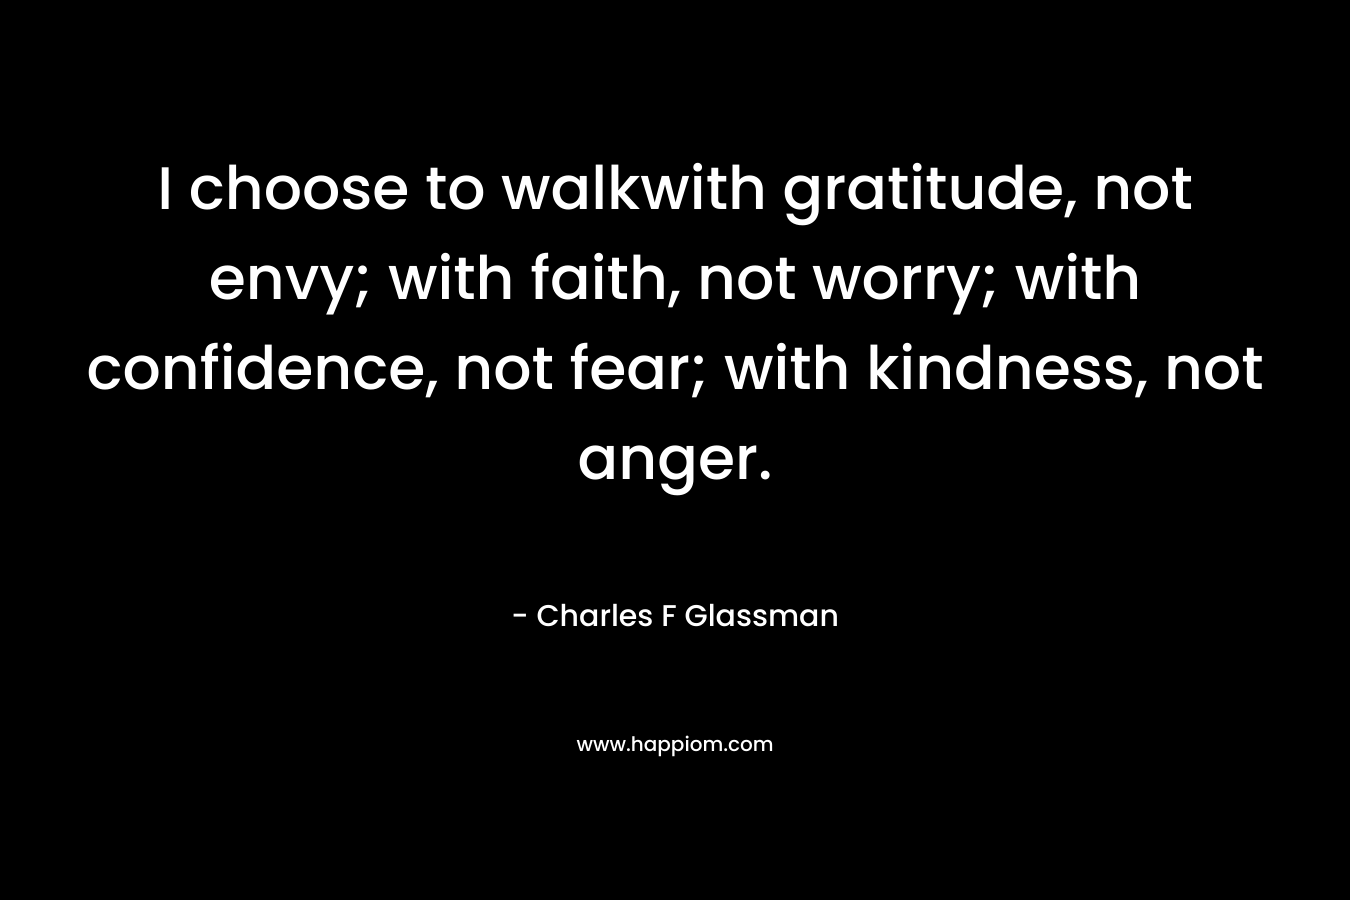 I choose to walkwith gratitude, not envy; with faith, not worry; with confidence, not fear; with kindness, not anger.